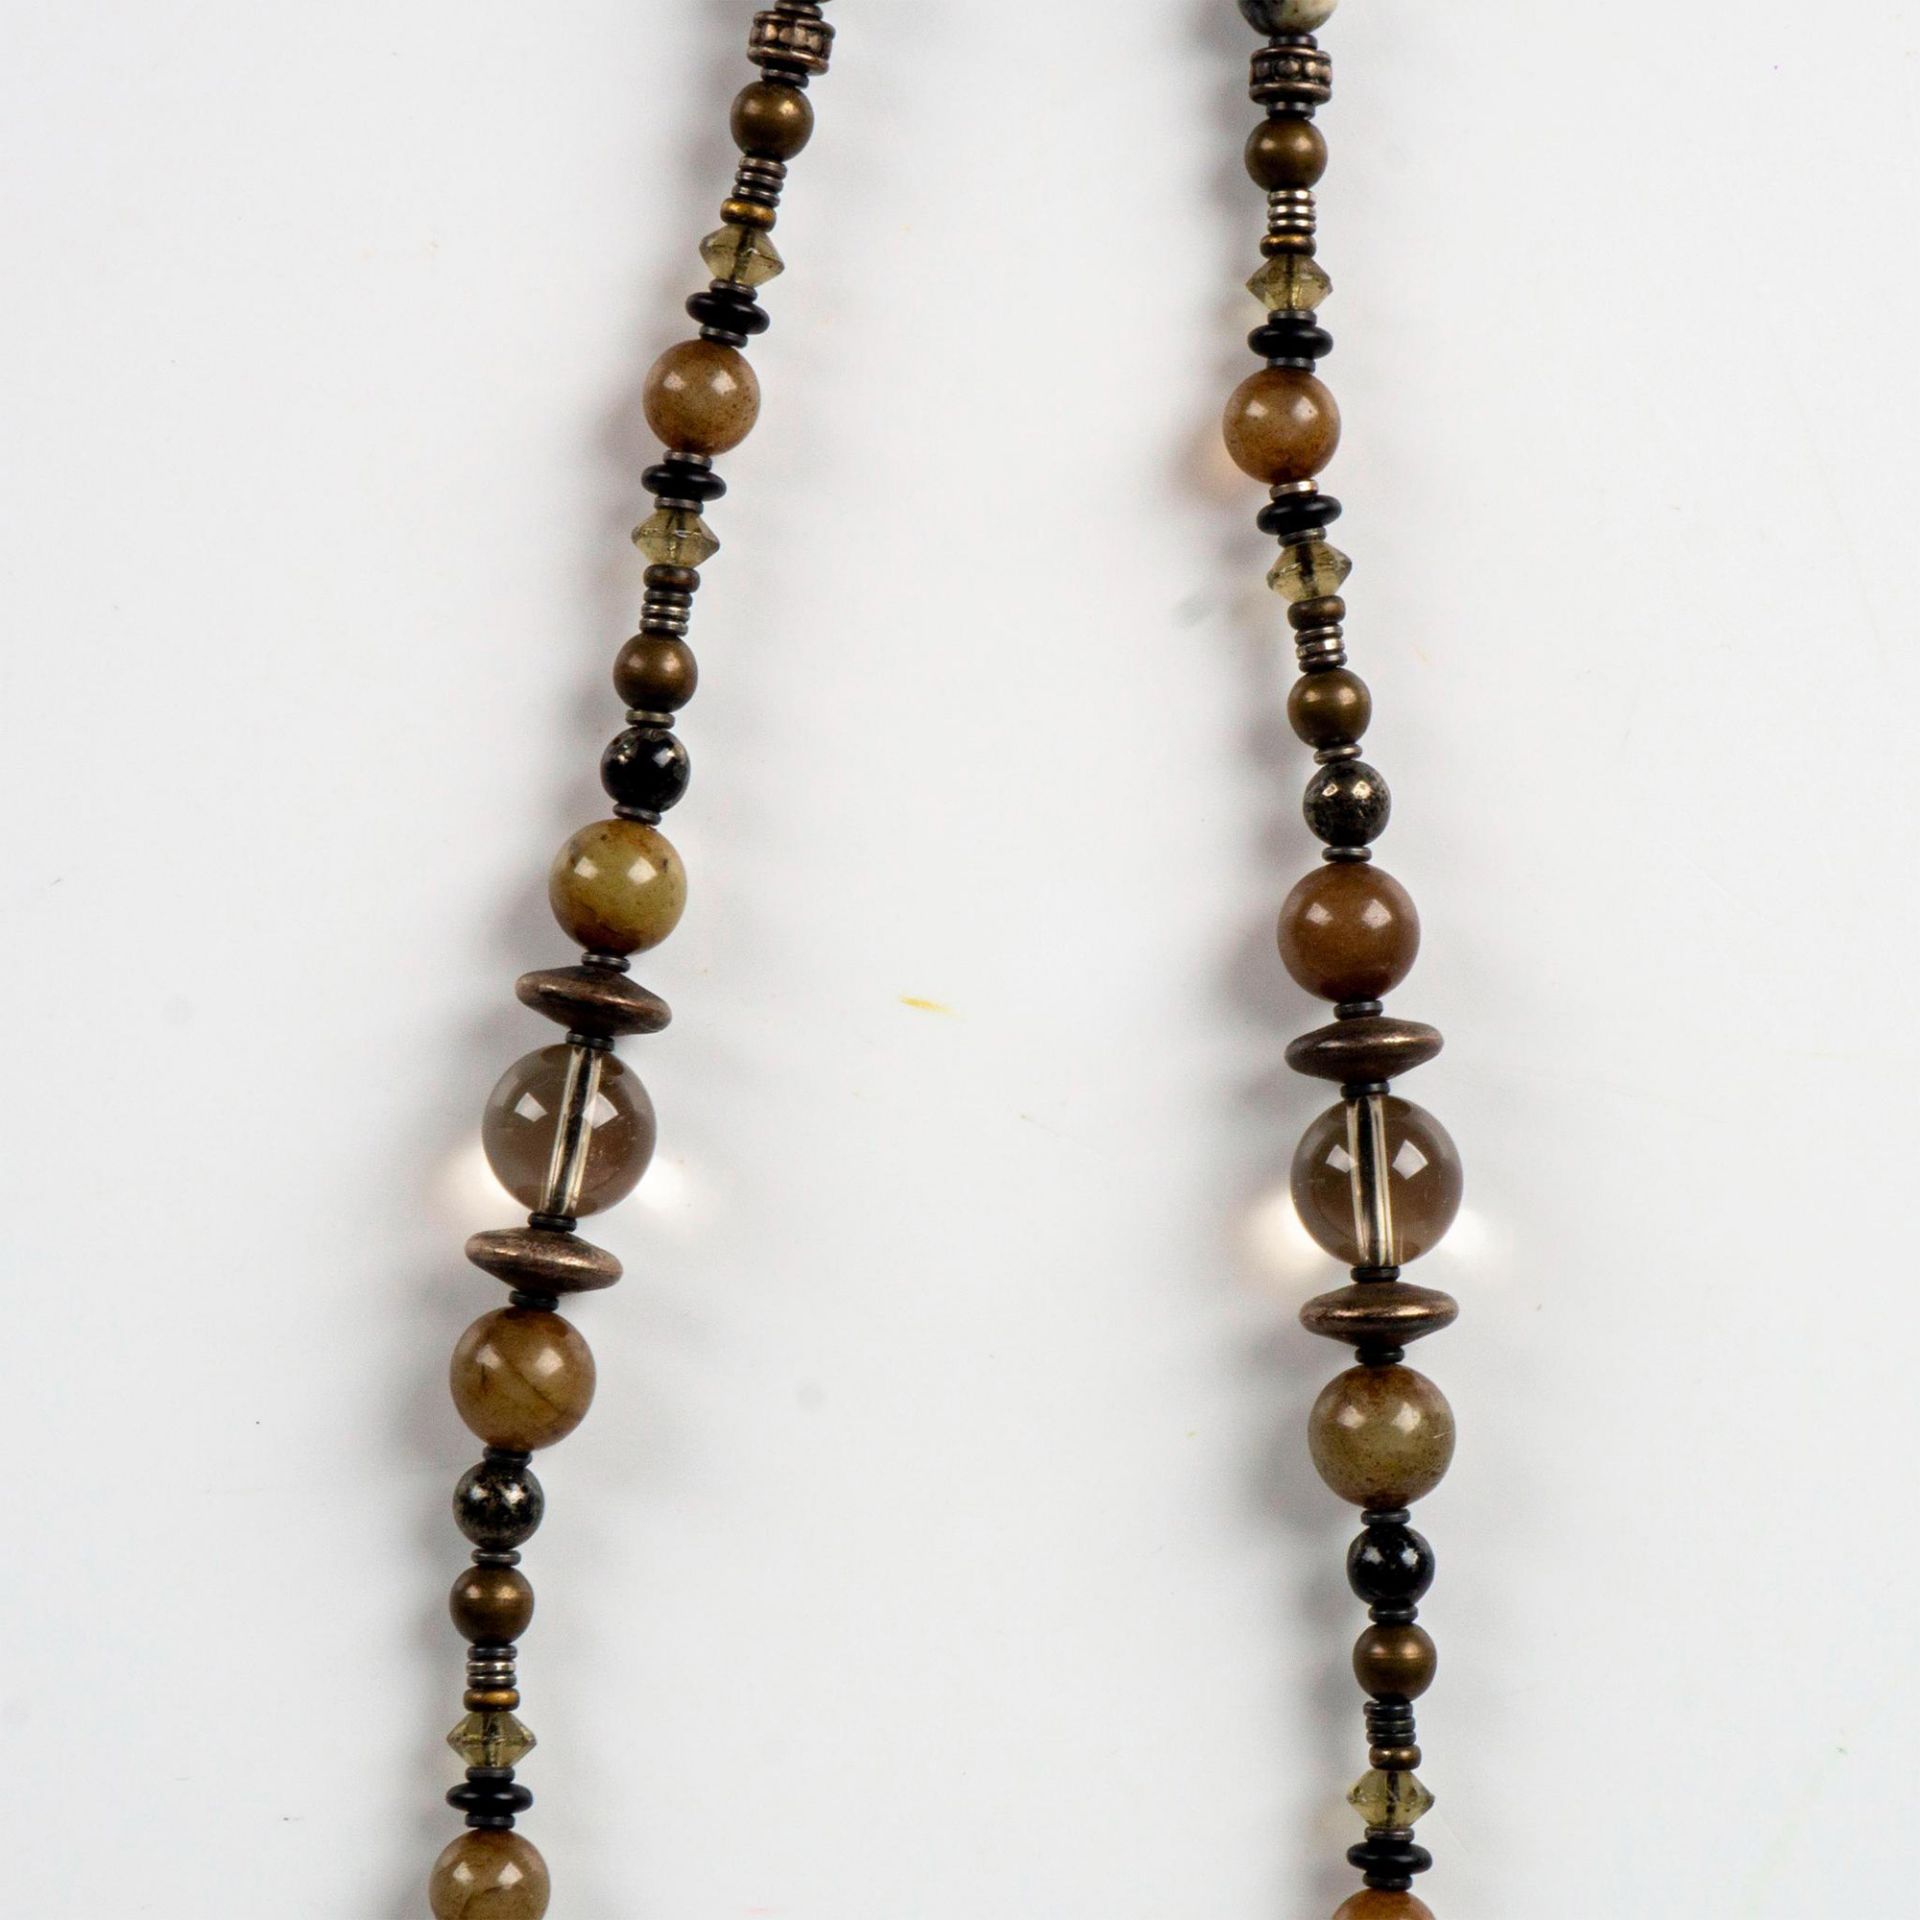 Vintage Tribal Beaded Wrap Necklace with Carved Pendant - Image 3 of 3